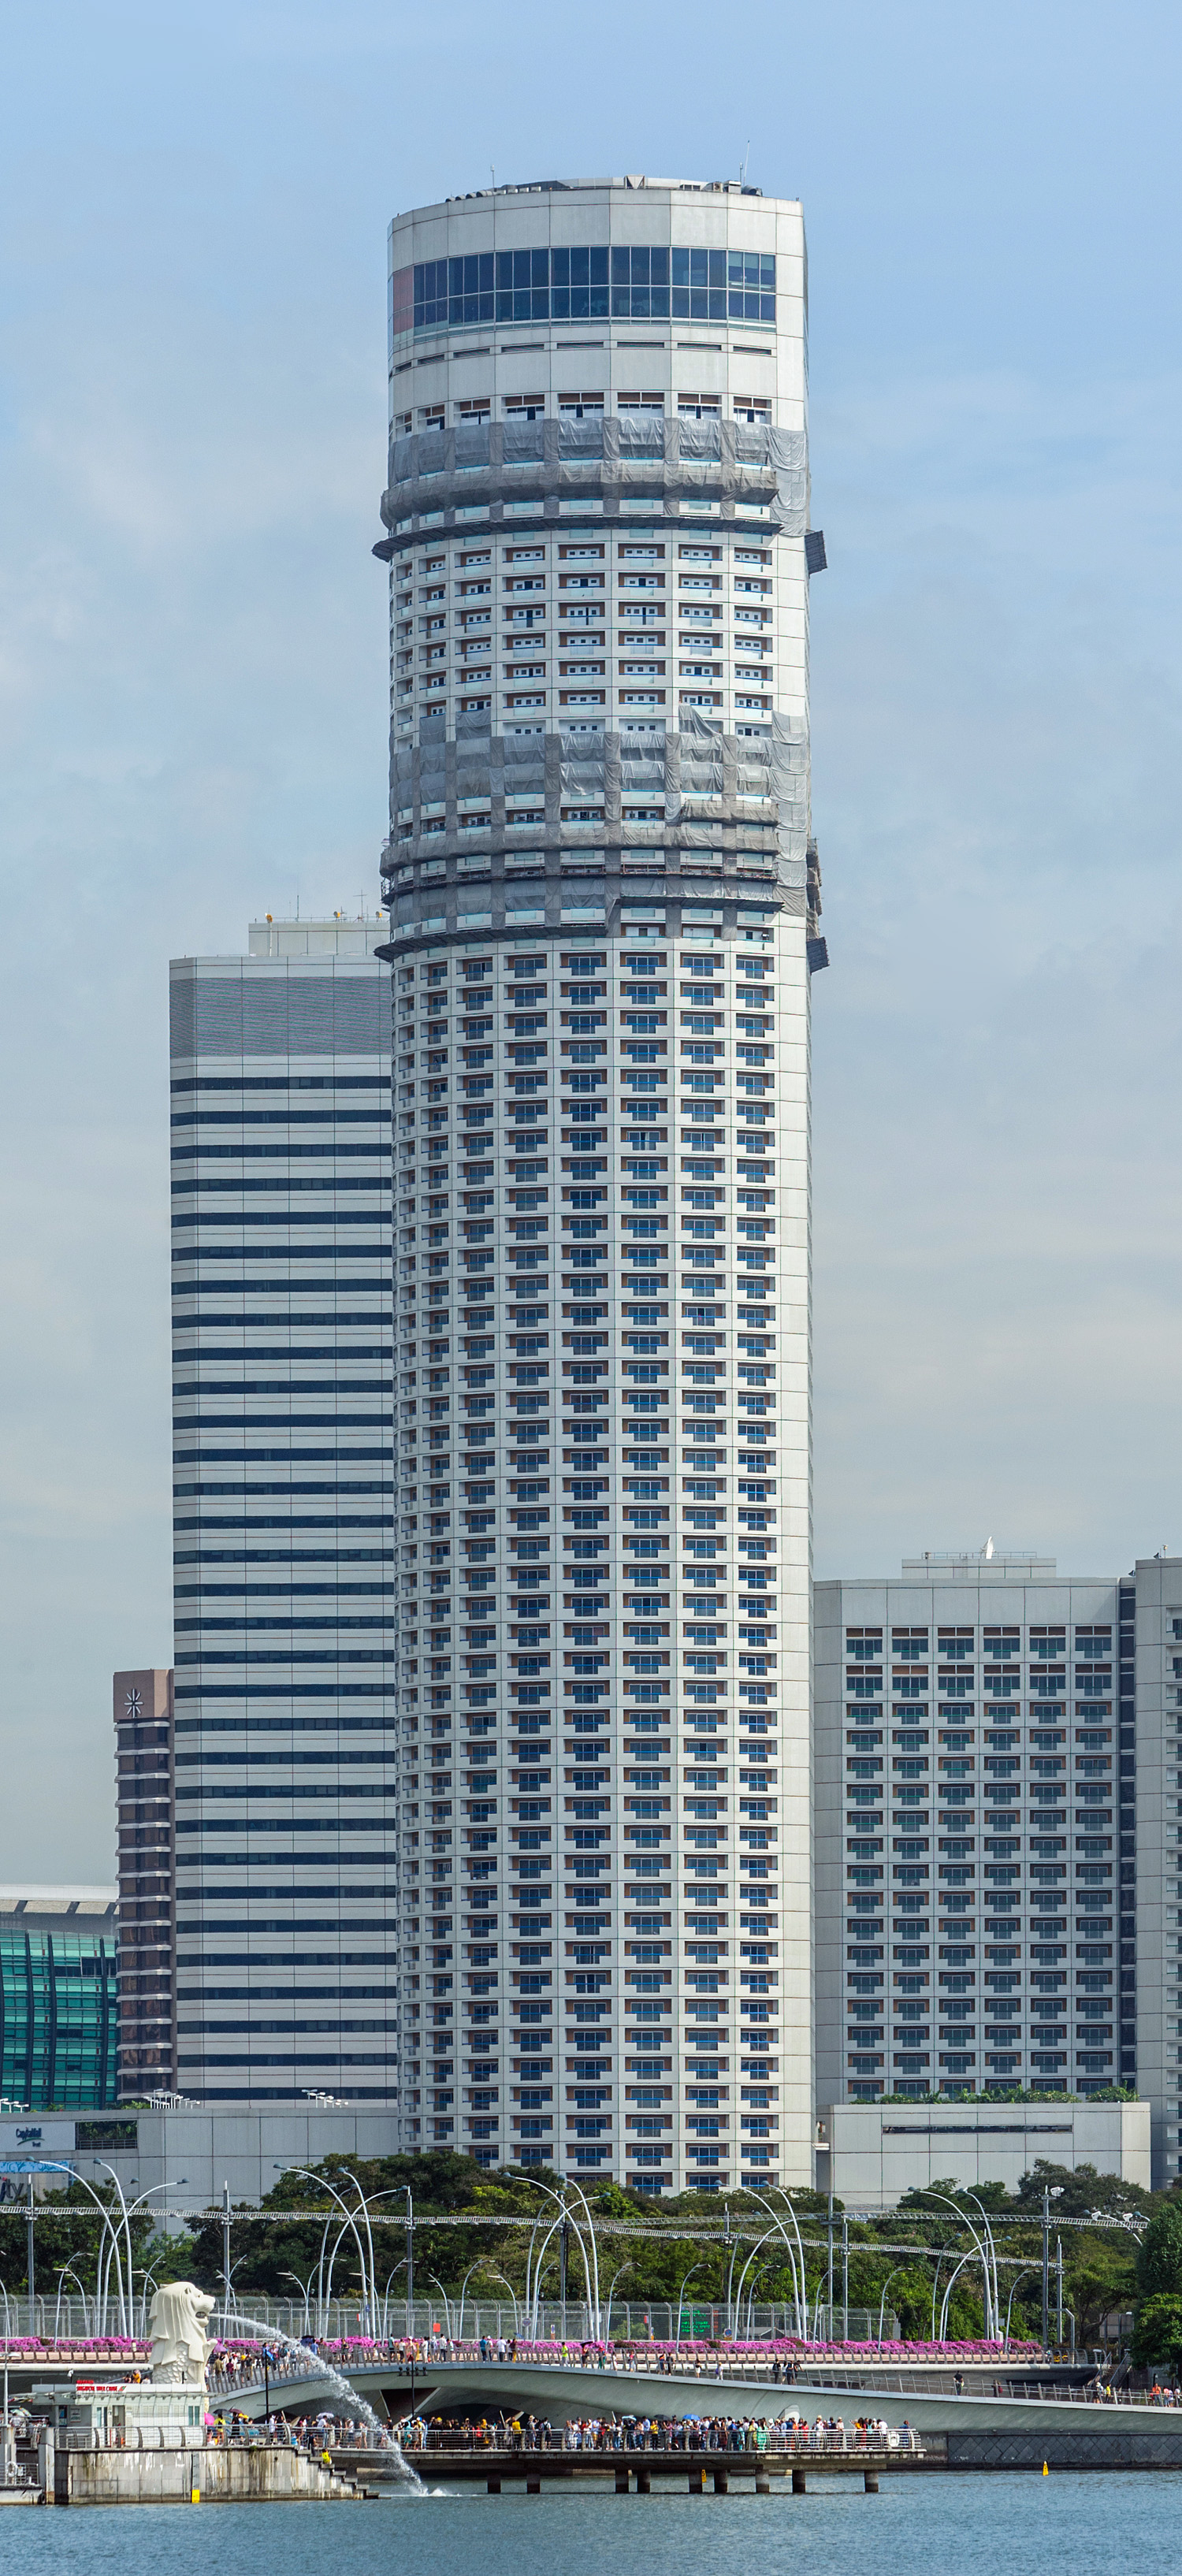 Swissotel The Stamford, Singapore - View from the south. © Mathias Beinling